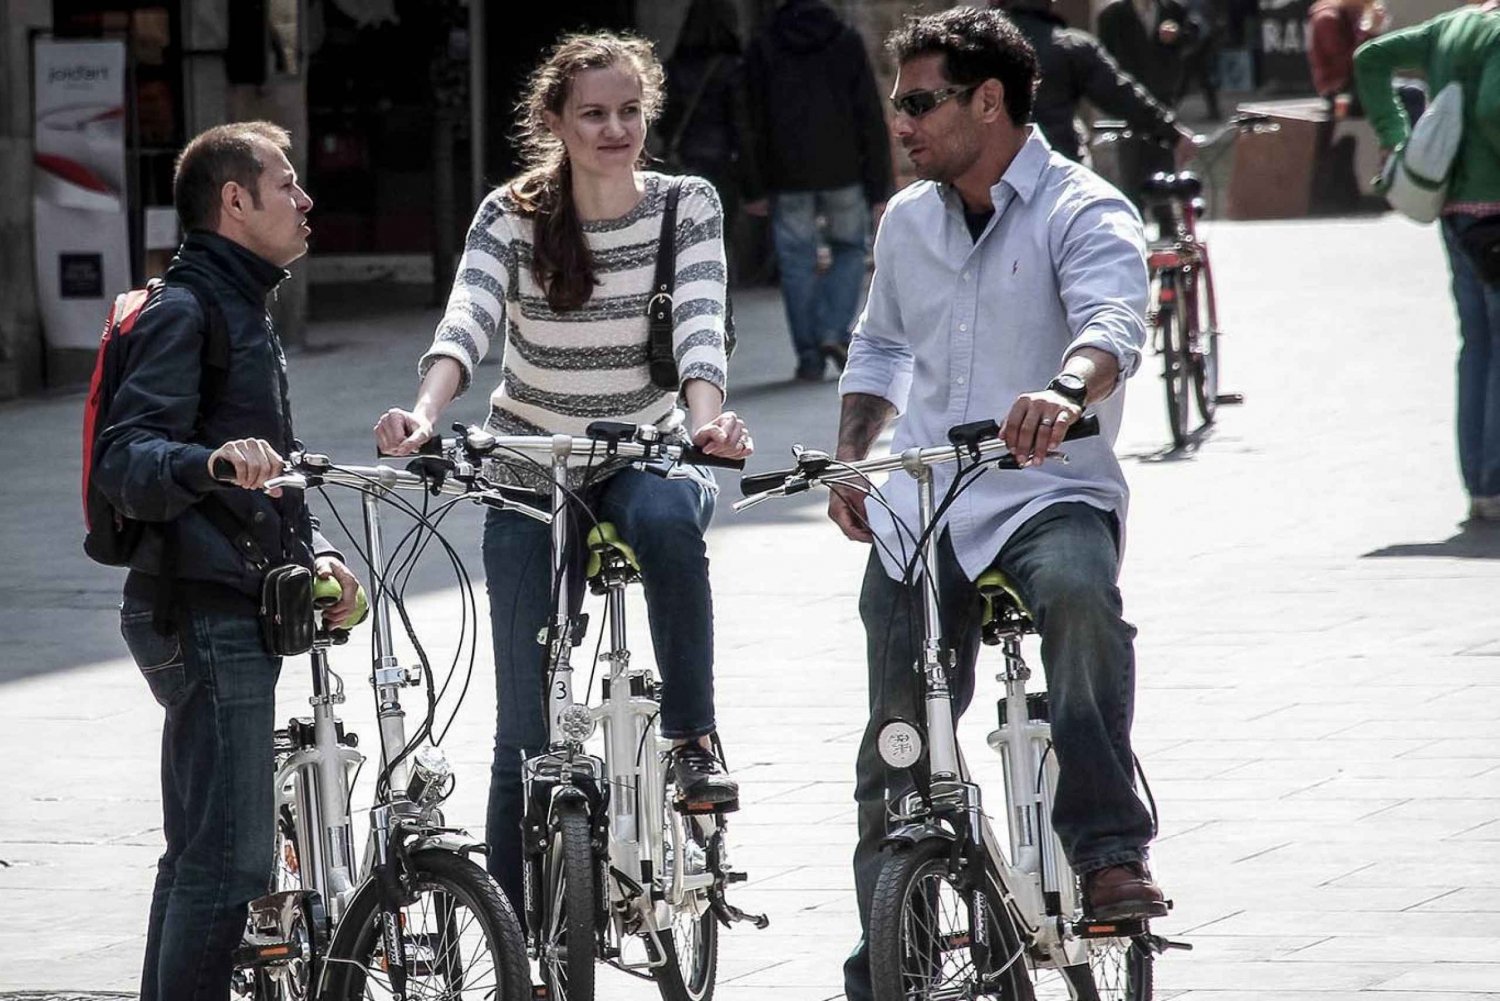 Barcelona: Small Group or Private Bike Tour